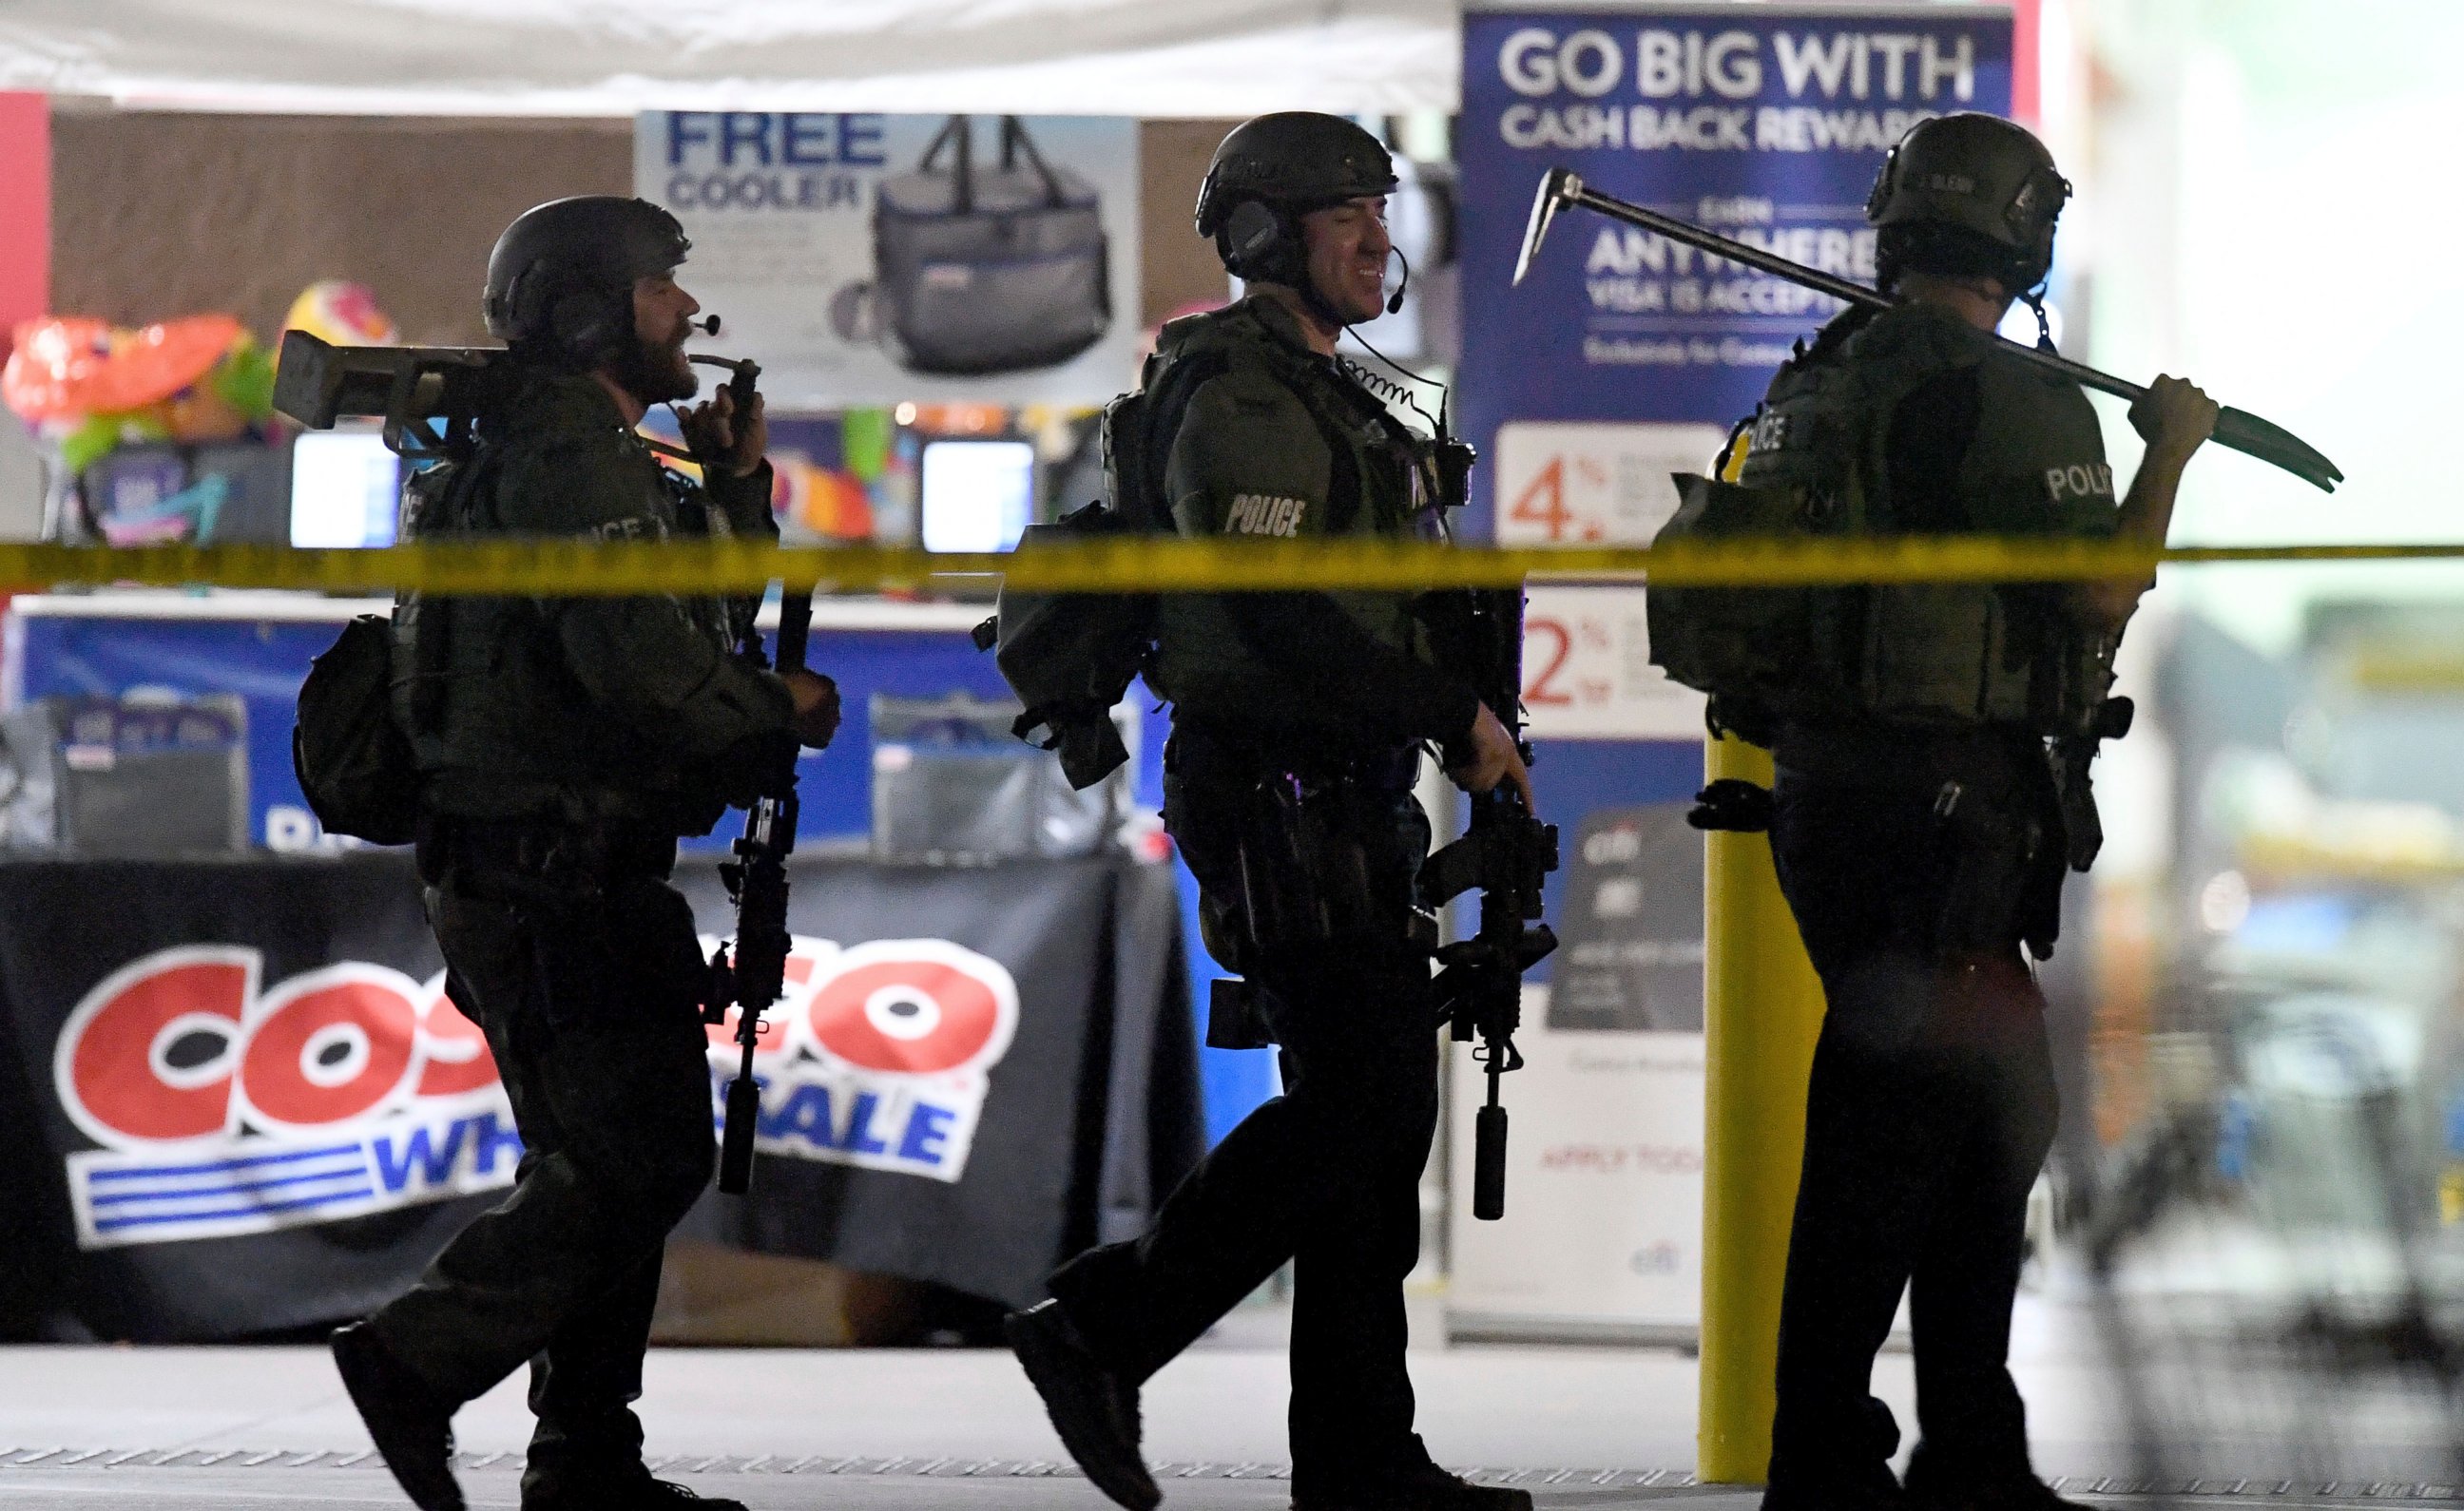 Heavily armed police officers exit the Costco following a shooting inside the wholesale warehouse in Corona, Calif., Friday, June 14, 2019. A gunman opened fire inside the store during an argument, killing a man, wounding two other people and sparkin